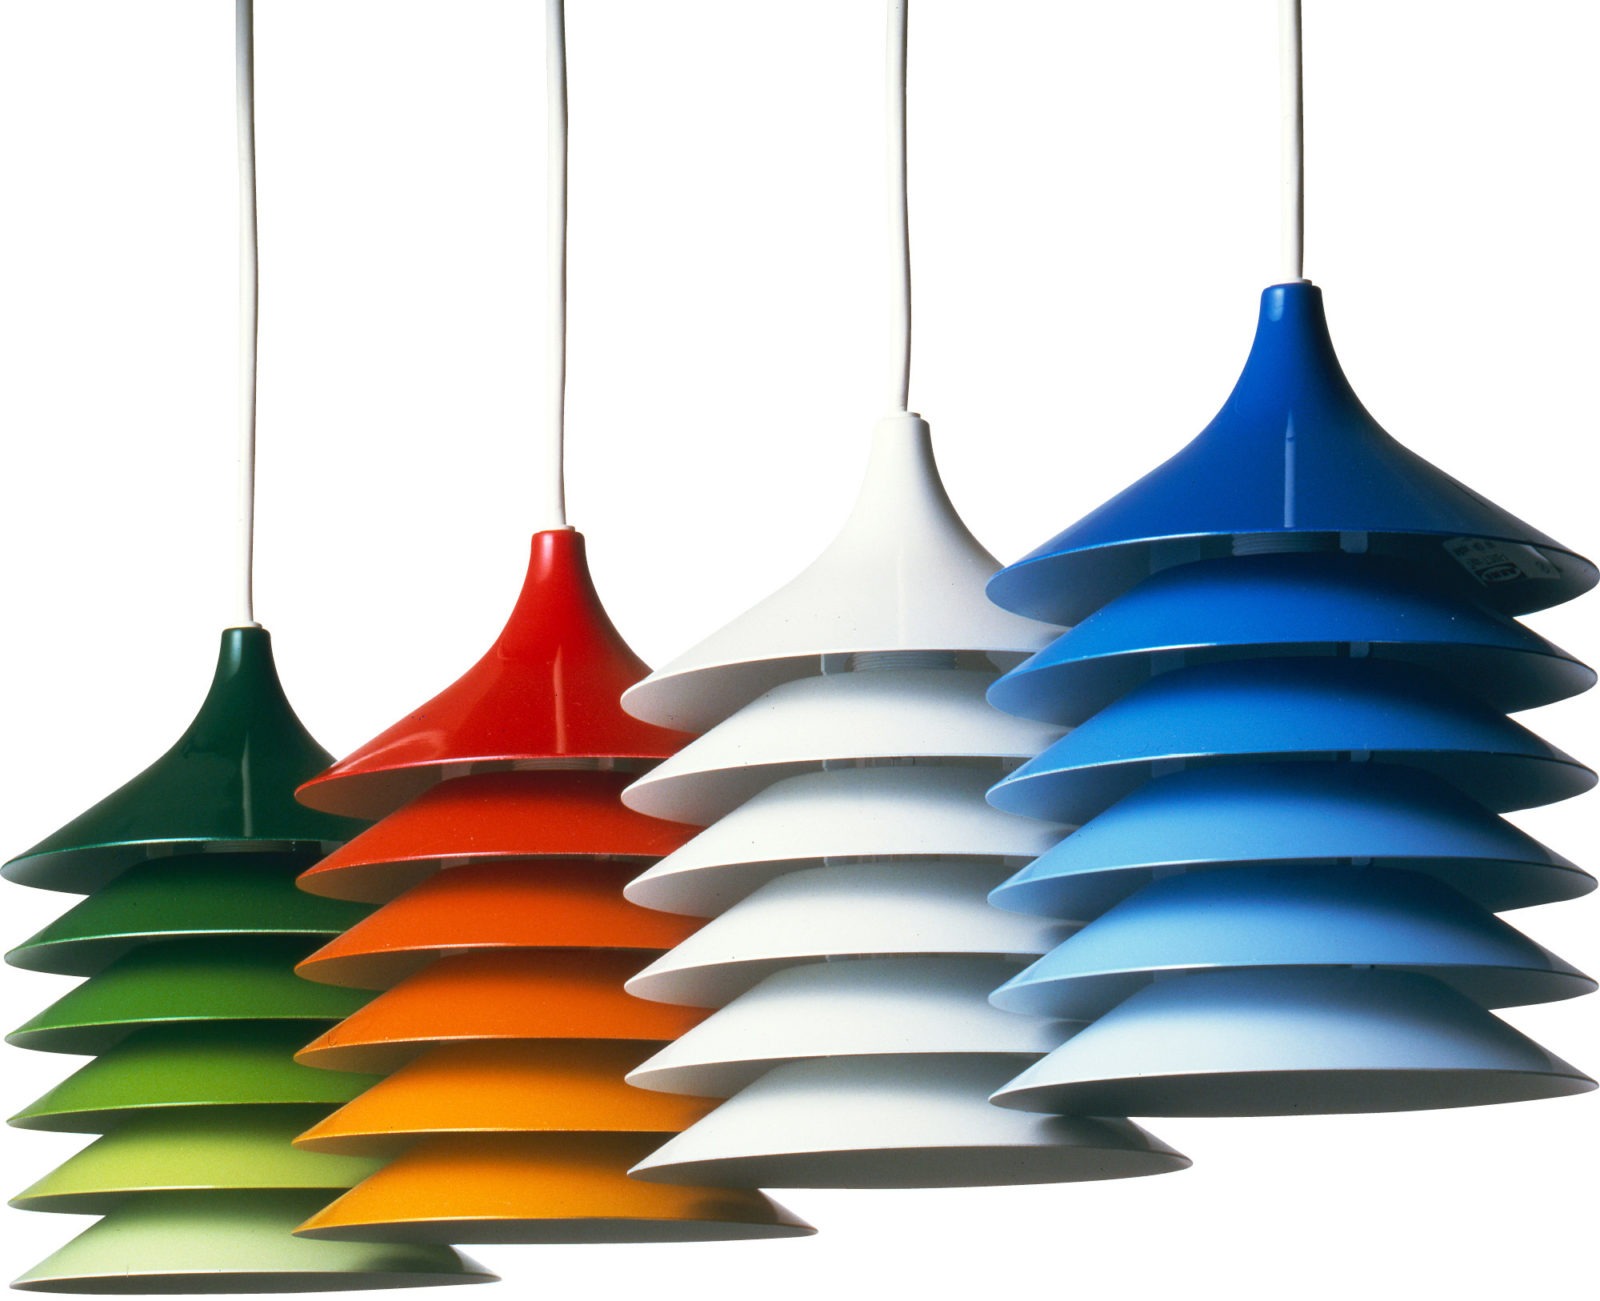 DUETT lamps hanging from ceiling, each has a stack of colourful, funnel-shaped shades.